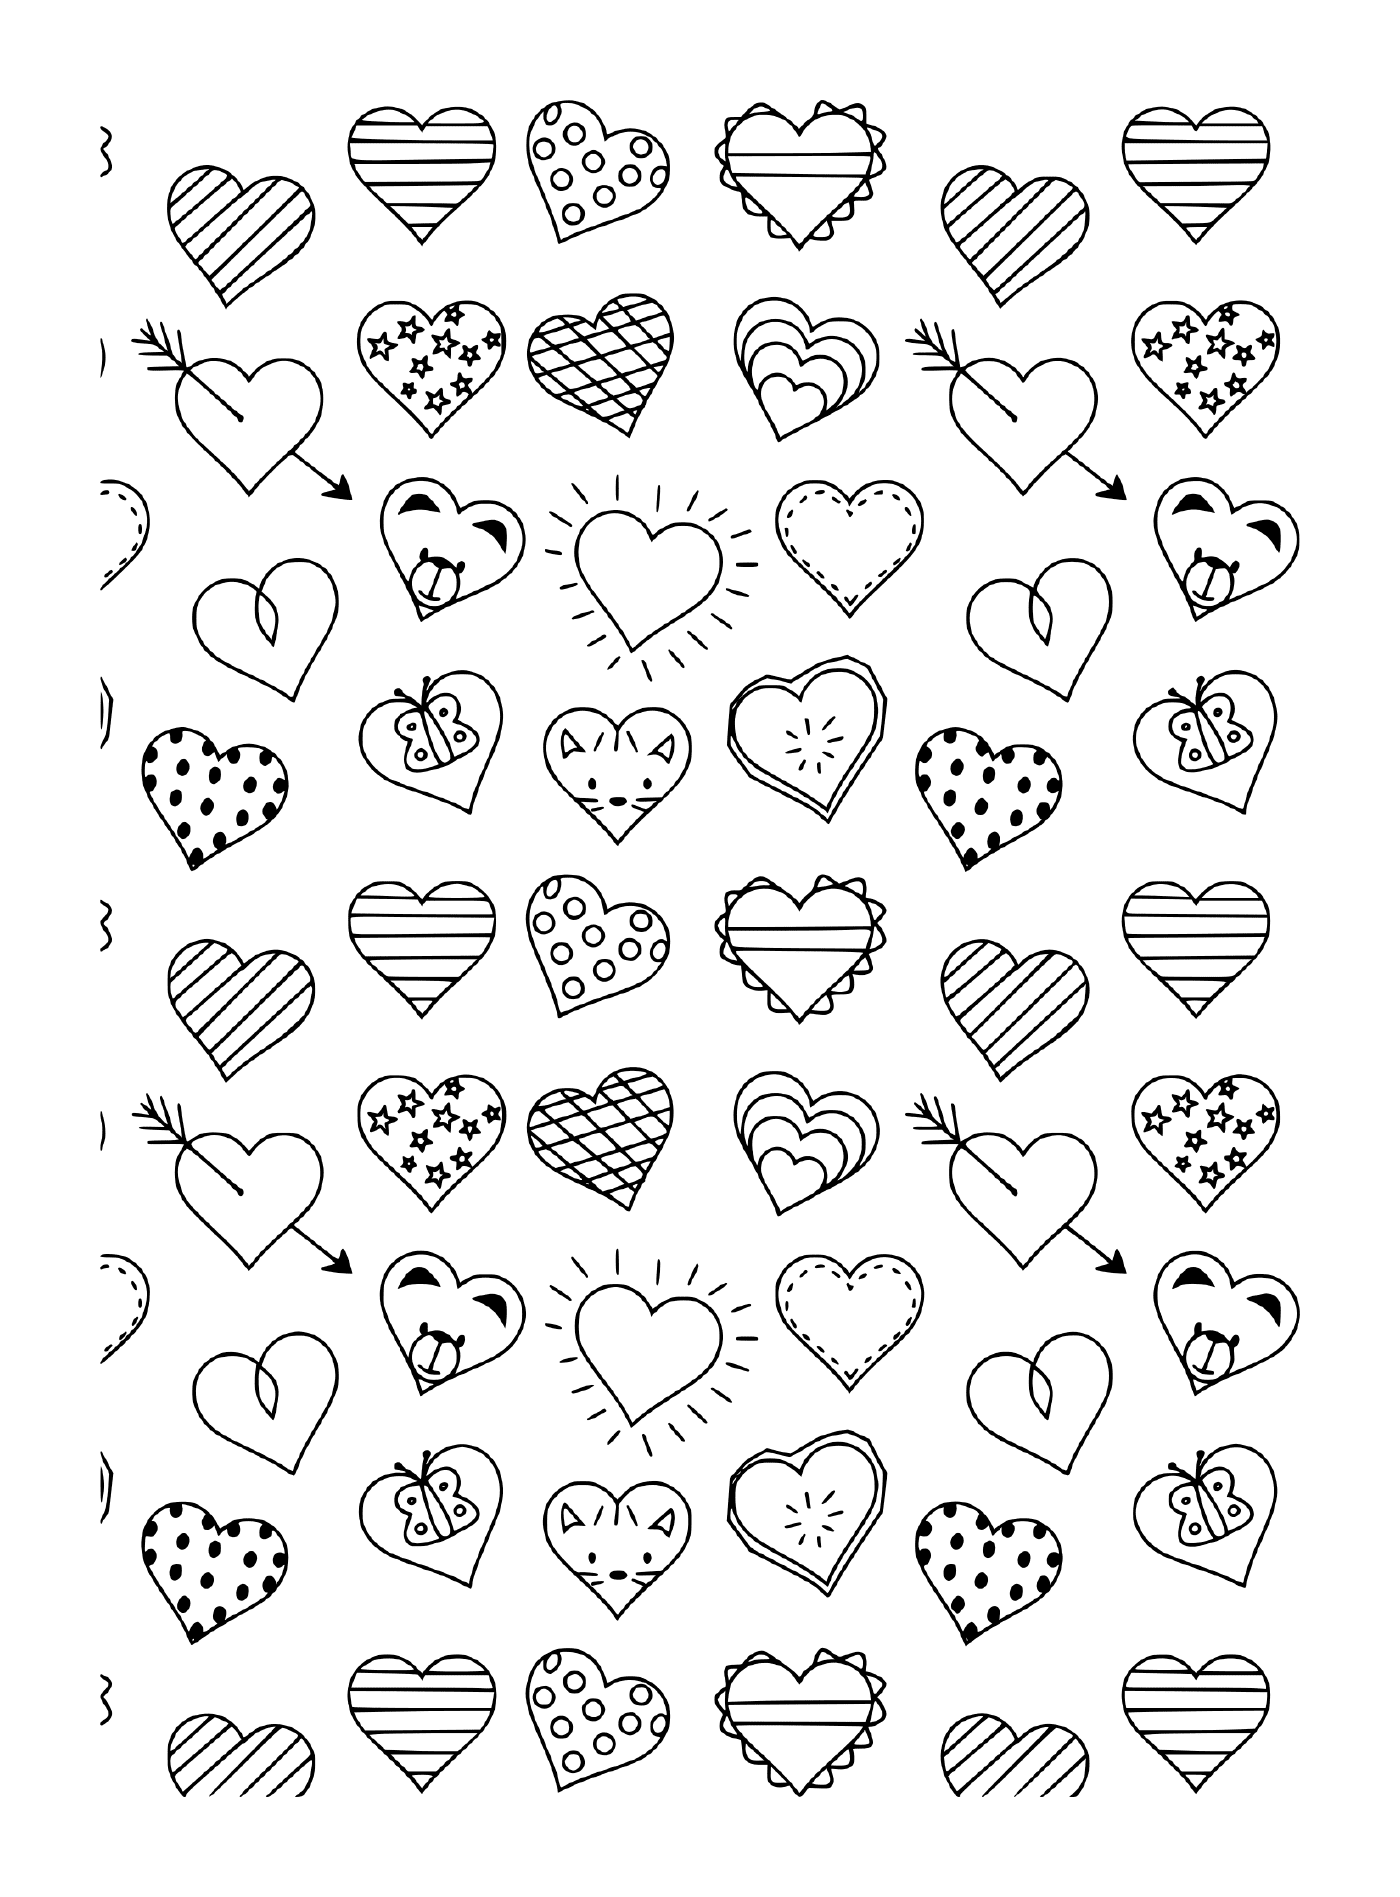  A black and white pattern of different hearts and arrows 